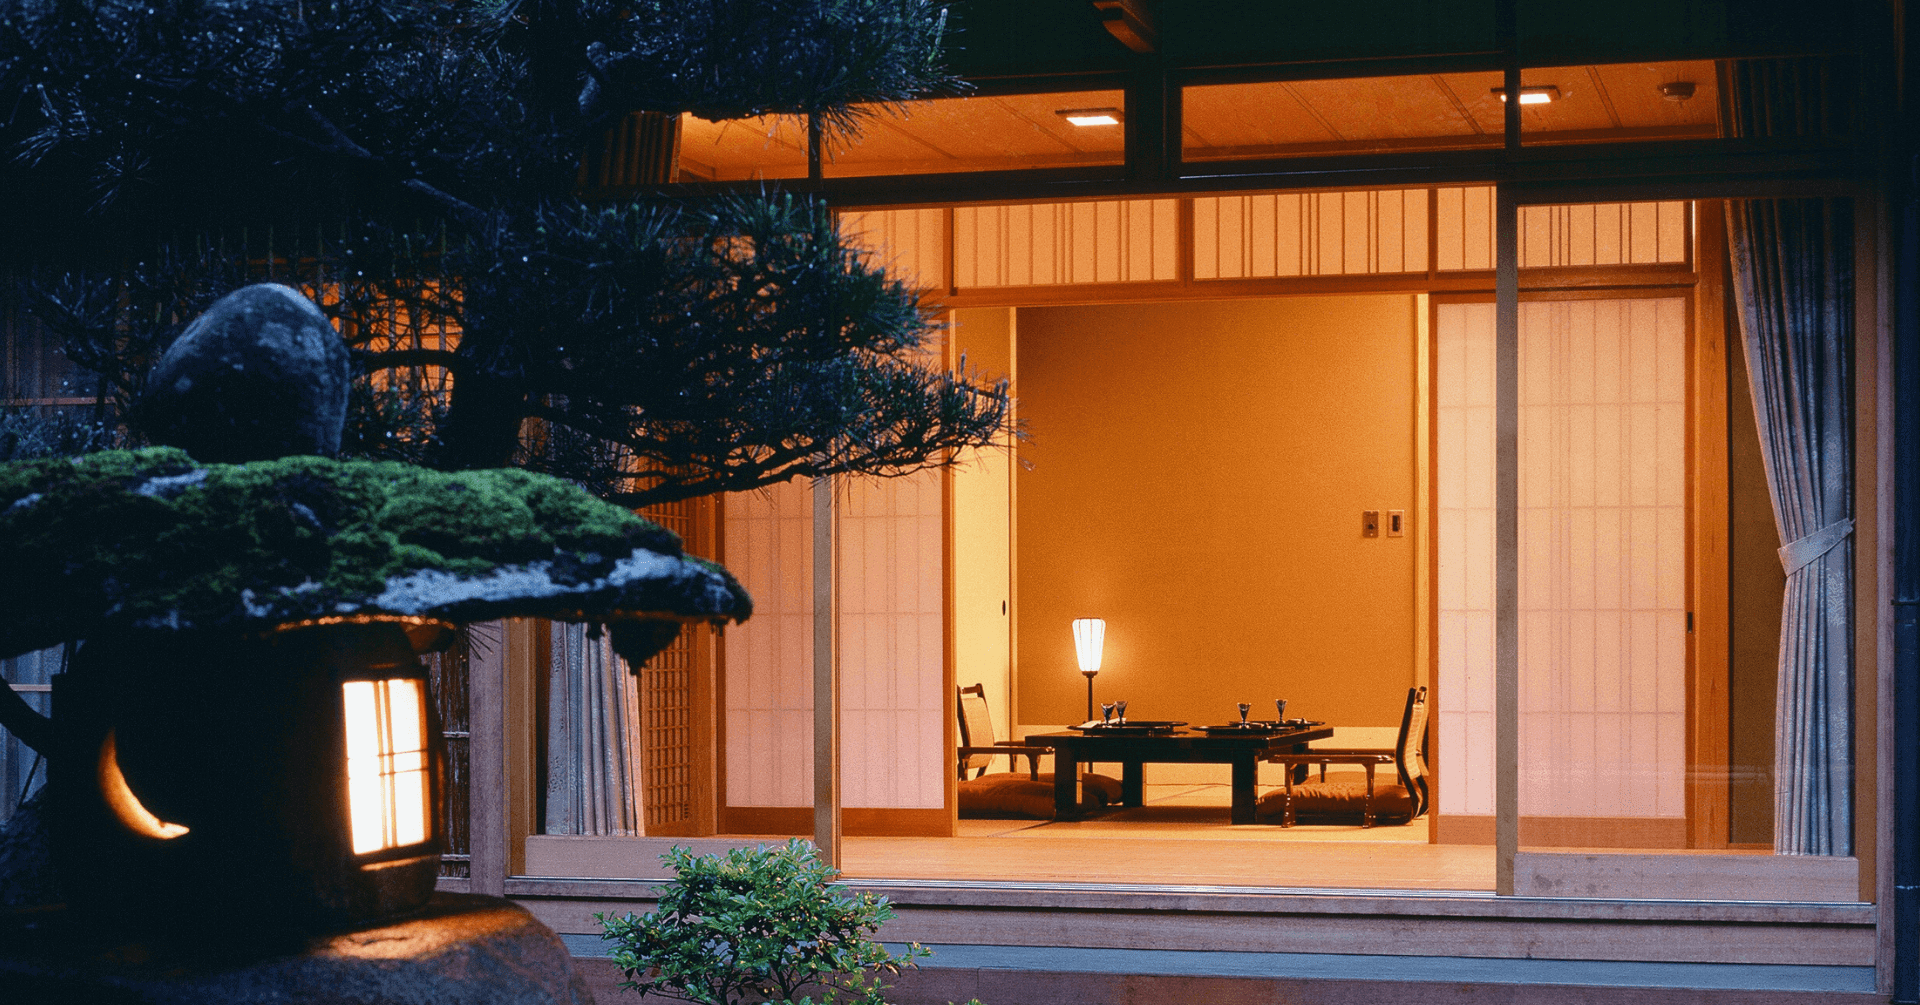 All You Need to Know About Staying at a Ryokan in Japan